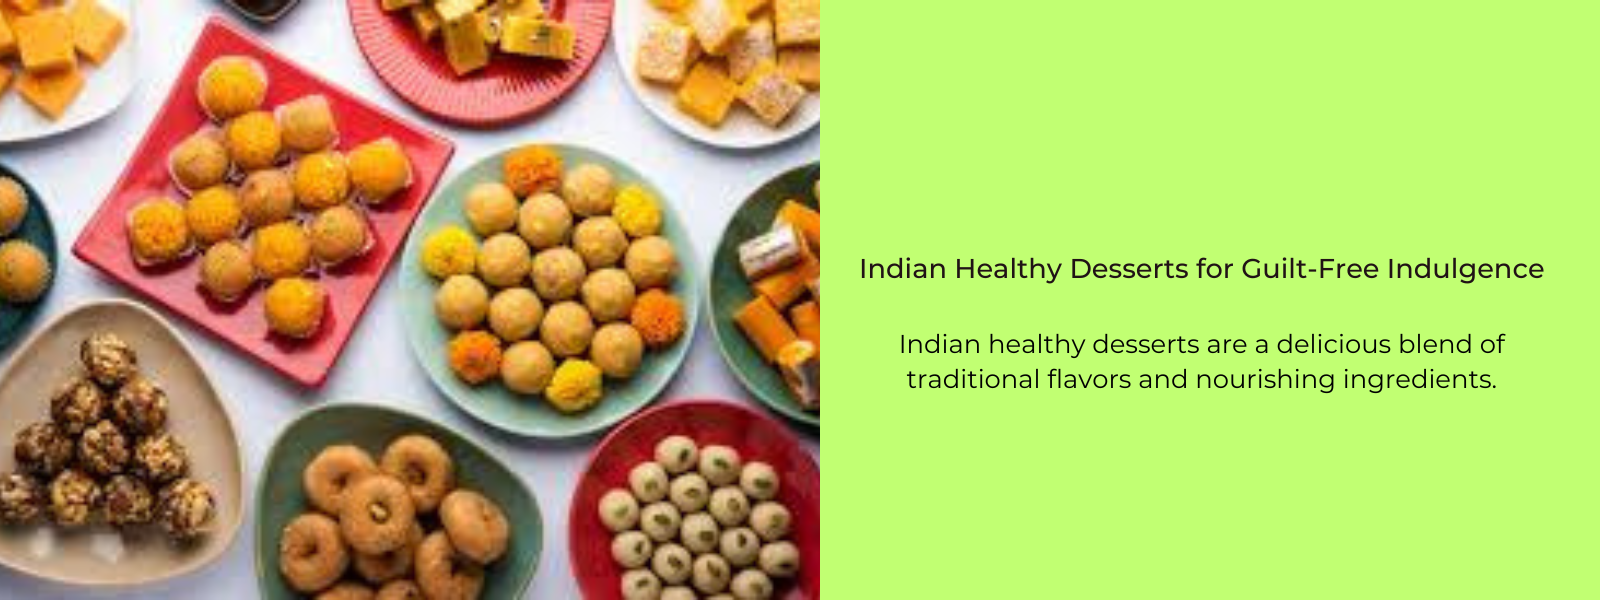 Indian Healthy Desserts for Guilt-Free Indulgence